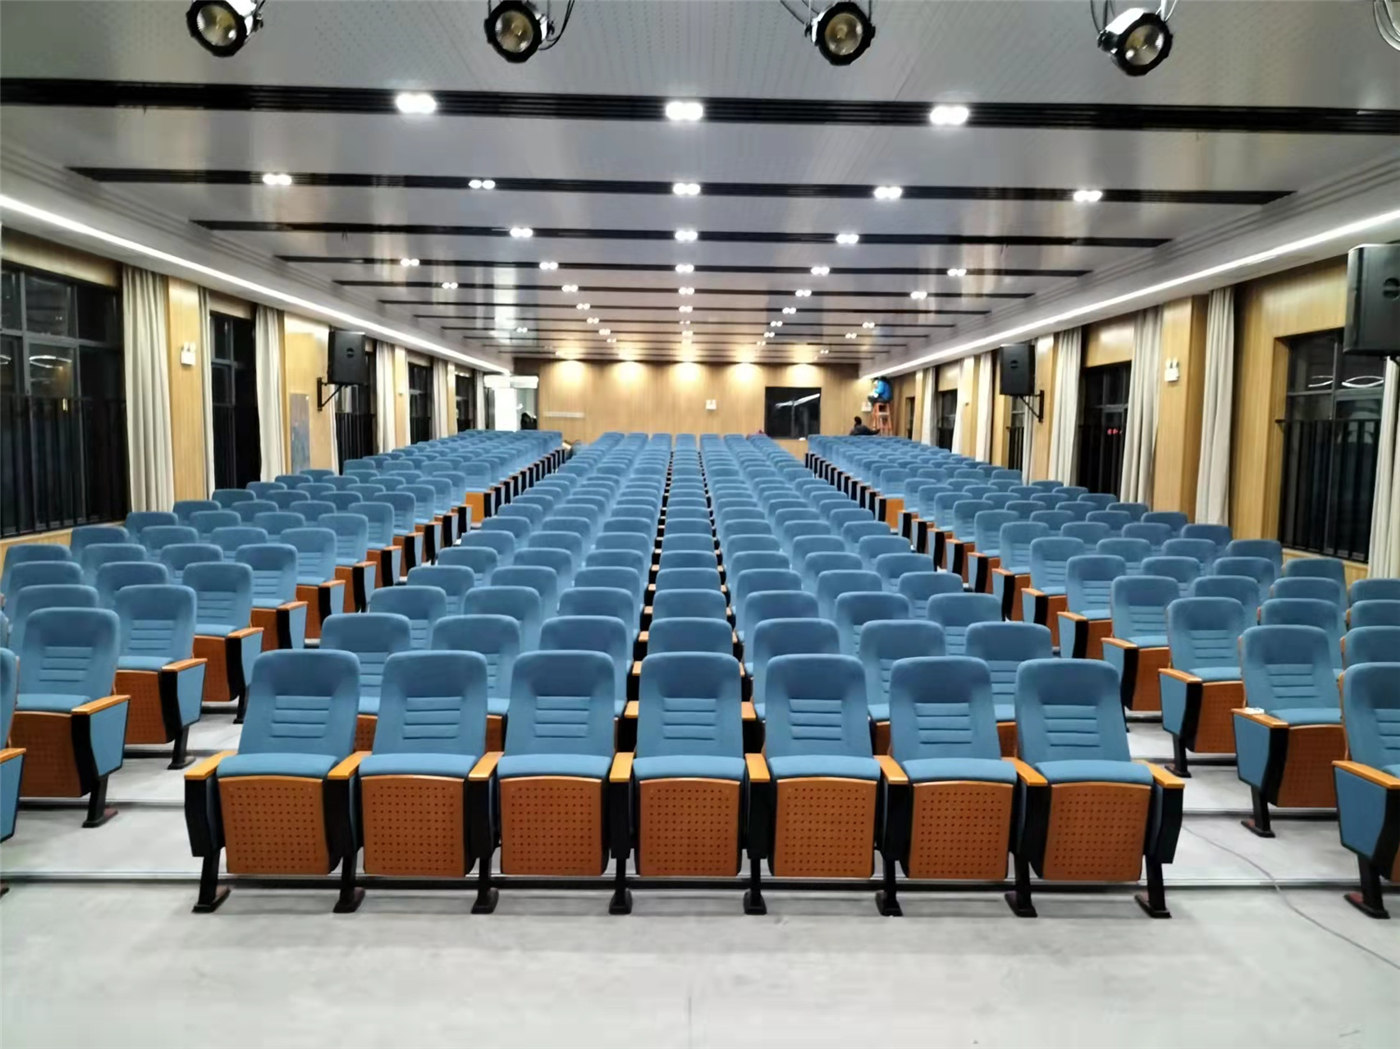 Make a Lasting Impression with Luxury Auditorium Seating Solutions from Respected Manufacturers1